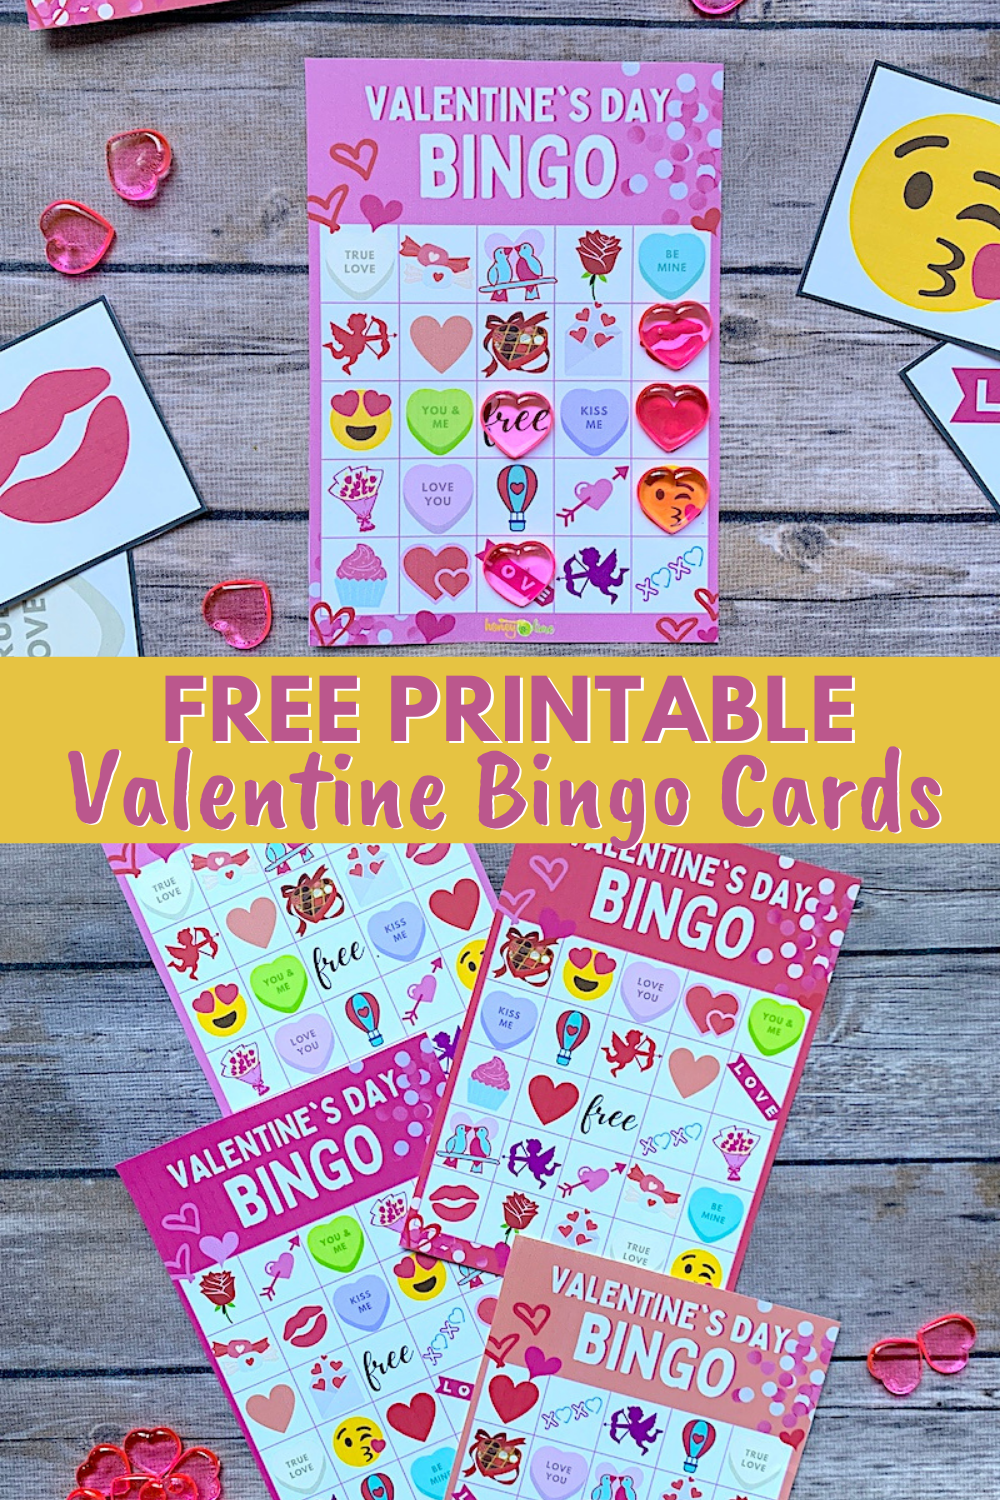 Free Valentine Bingo Cards Game with Pictures